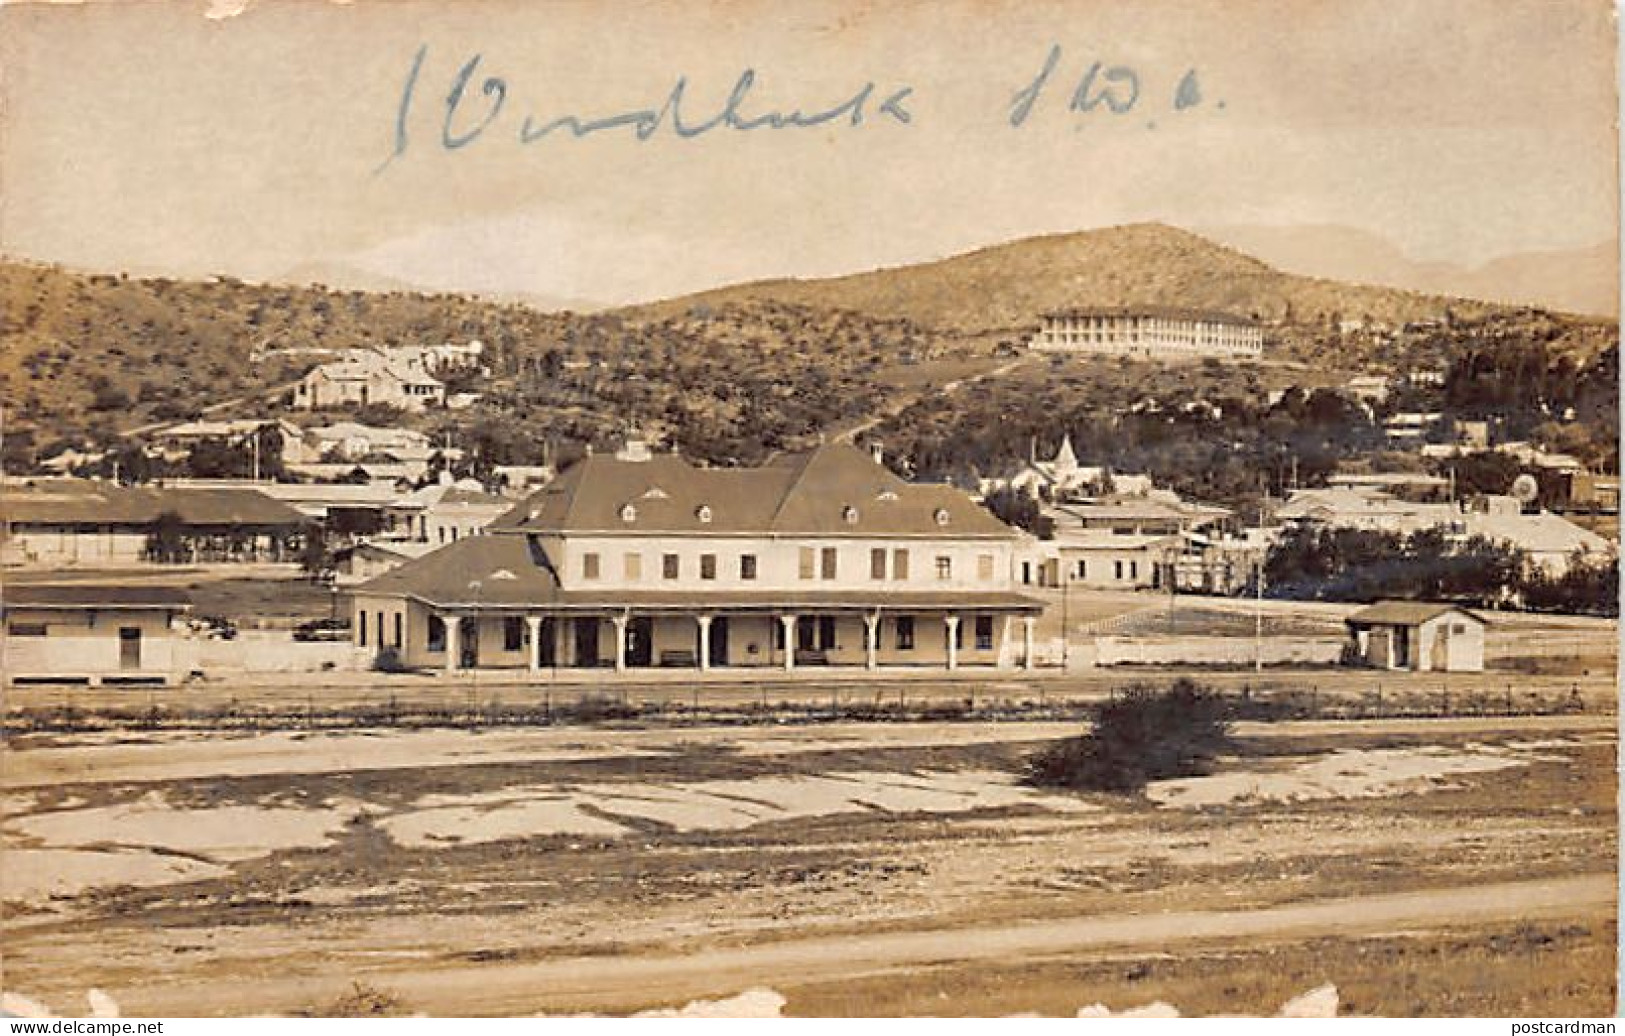 Namibia - WINDHOEK Windhuk - The Railway Station - REAL PHOTO - Publ. Unknown  - Namibie